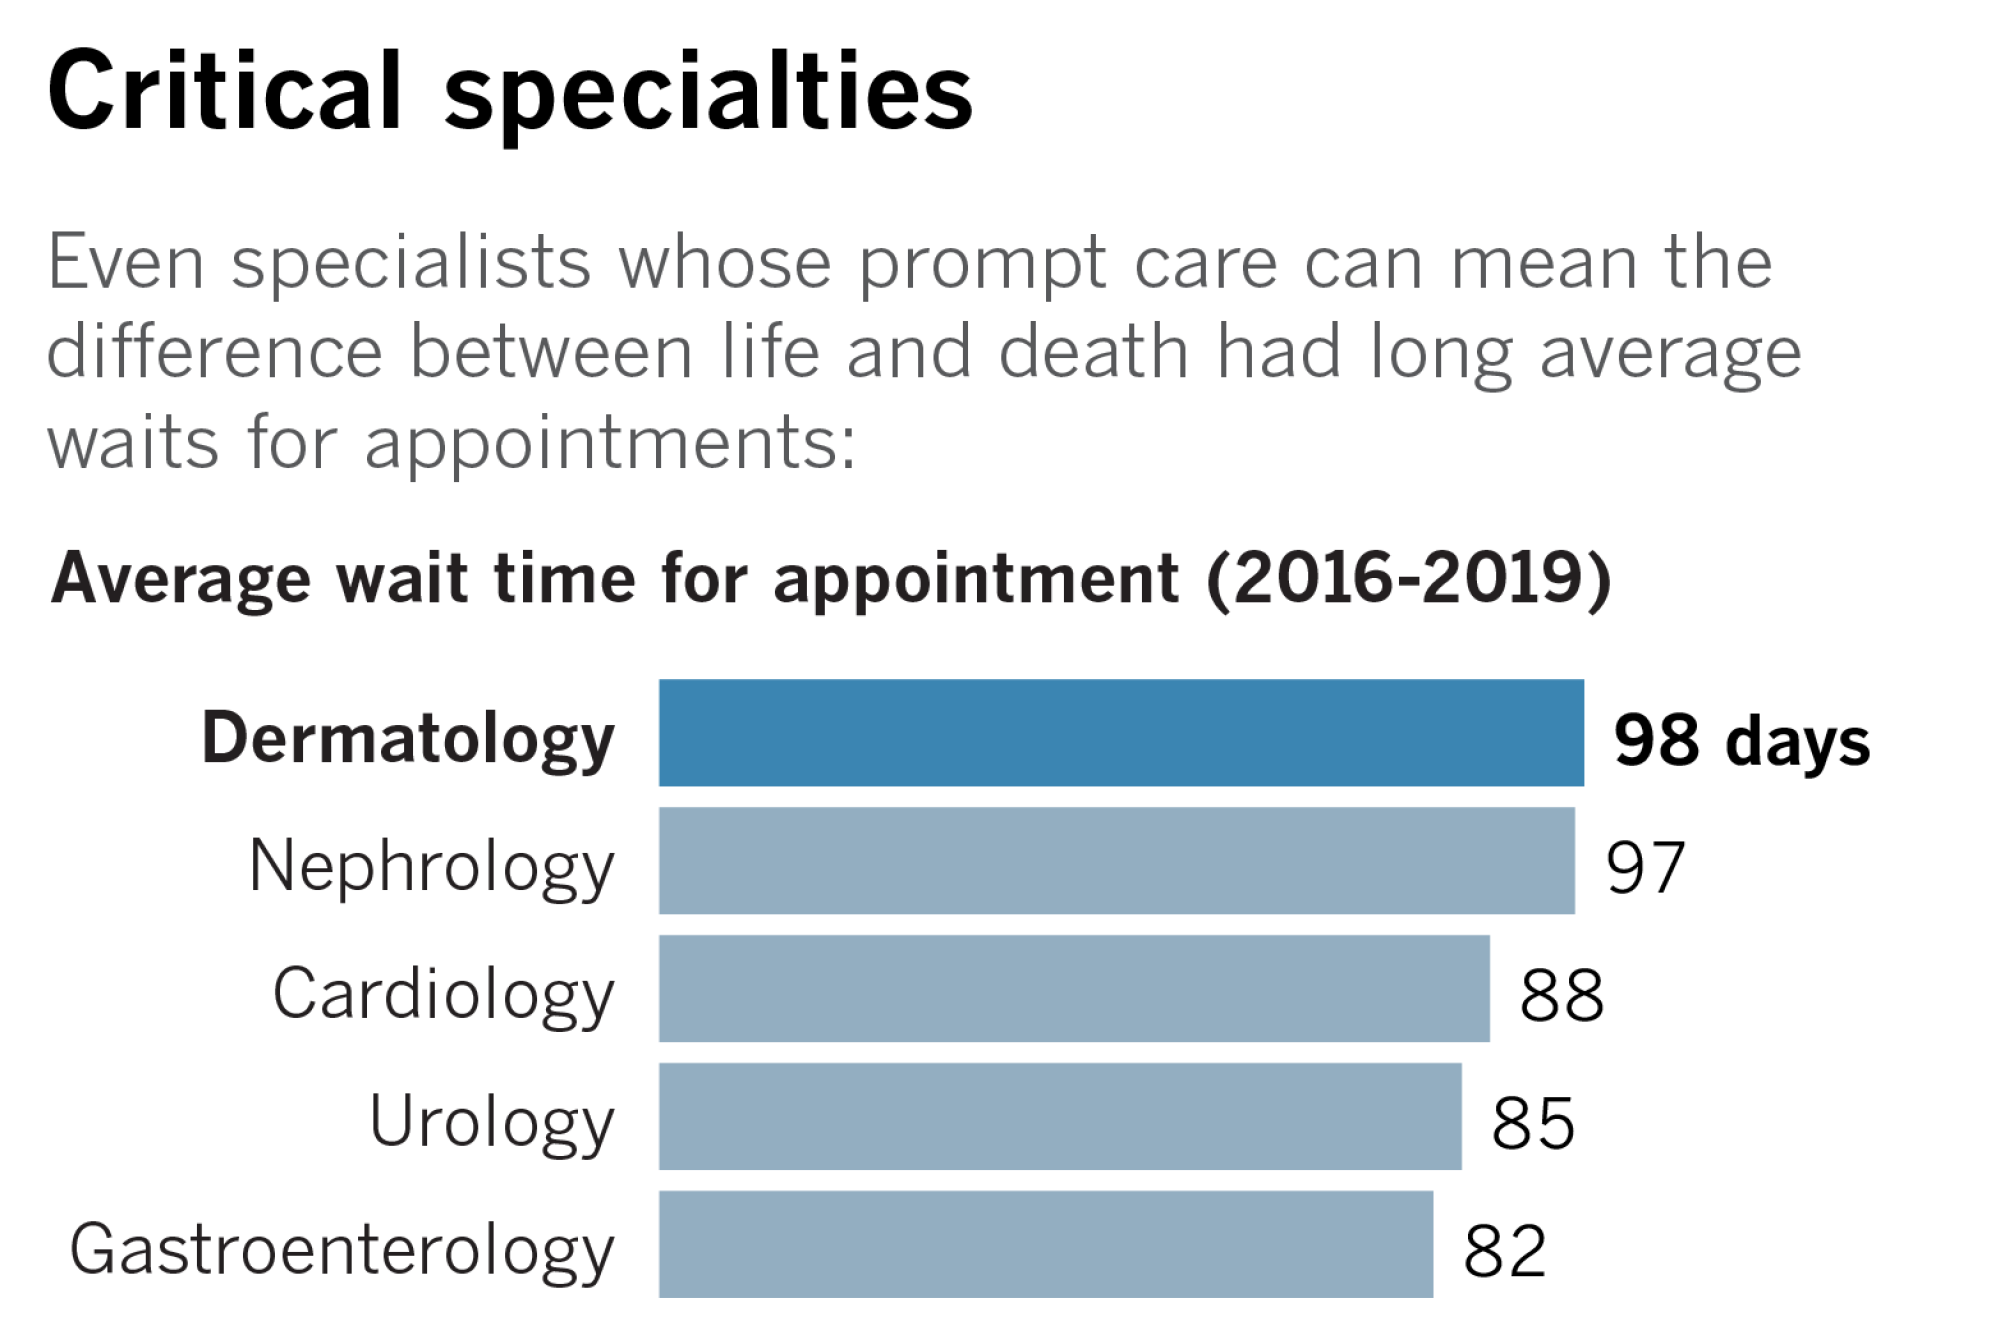 A chart showing average wait times by specialty, with dermatology's wait time at 98 days.